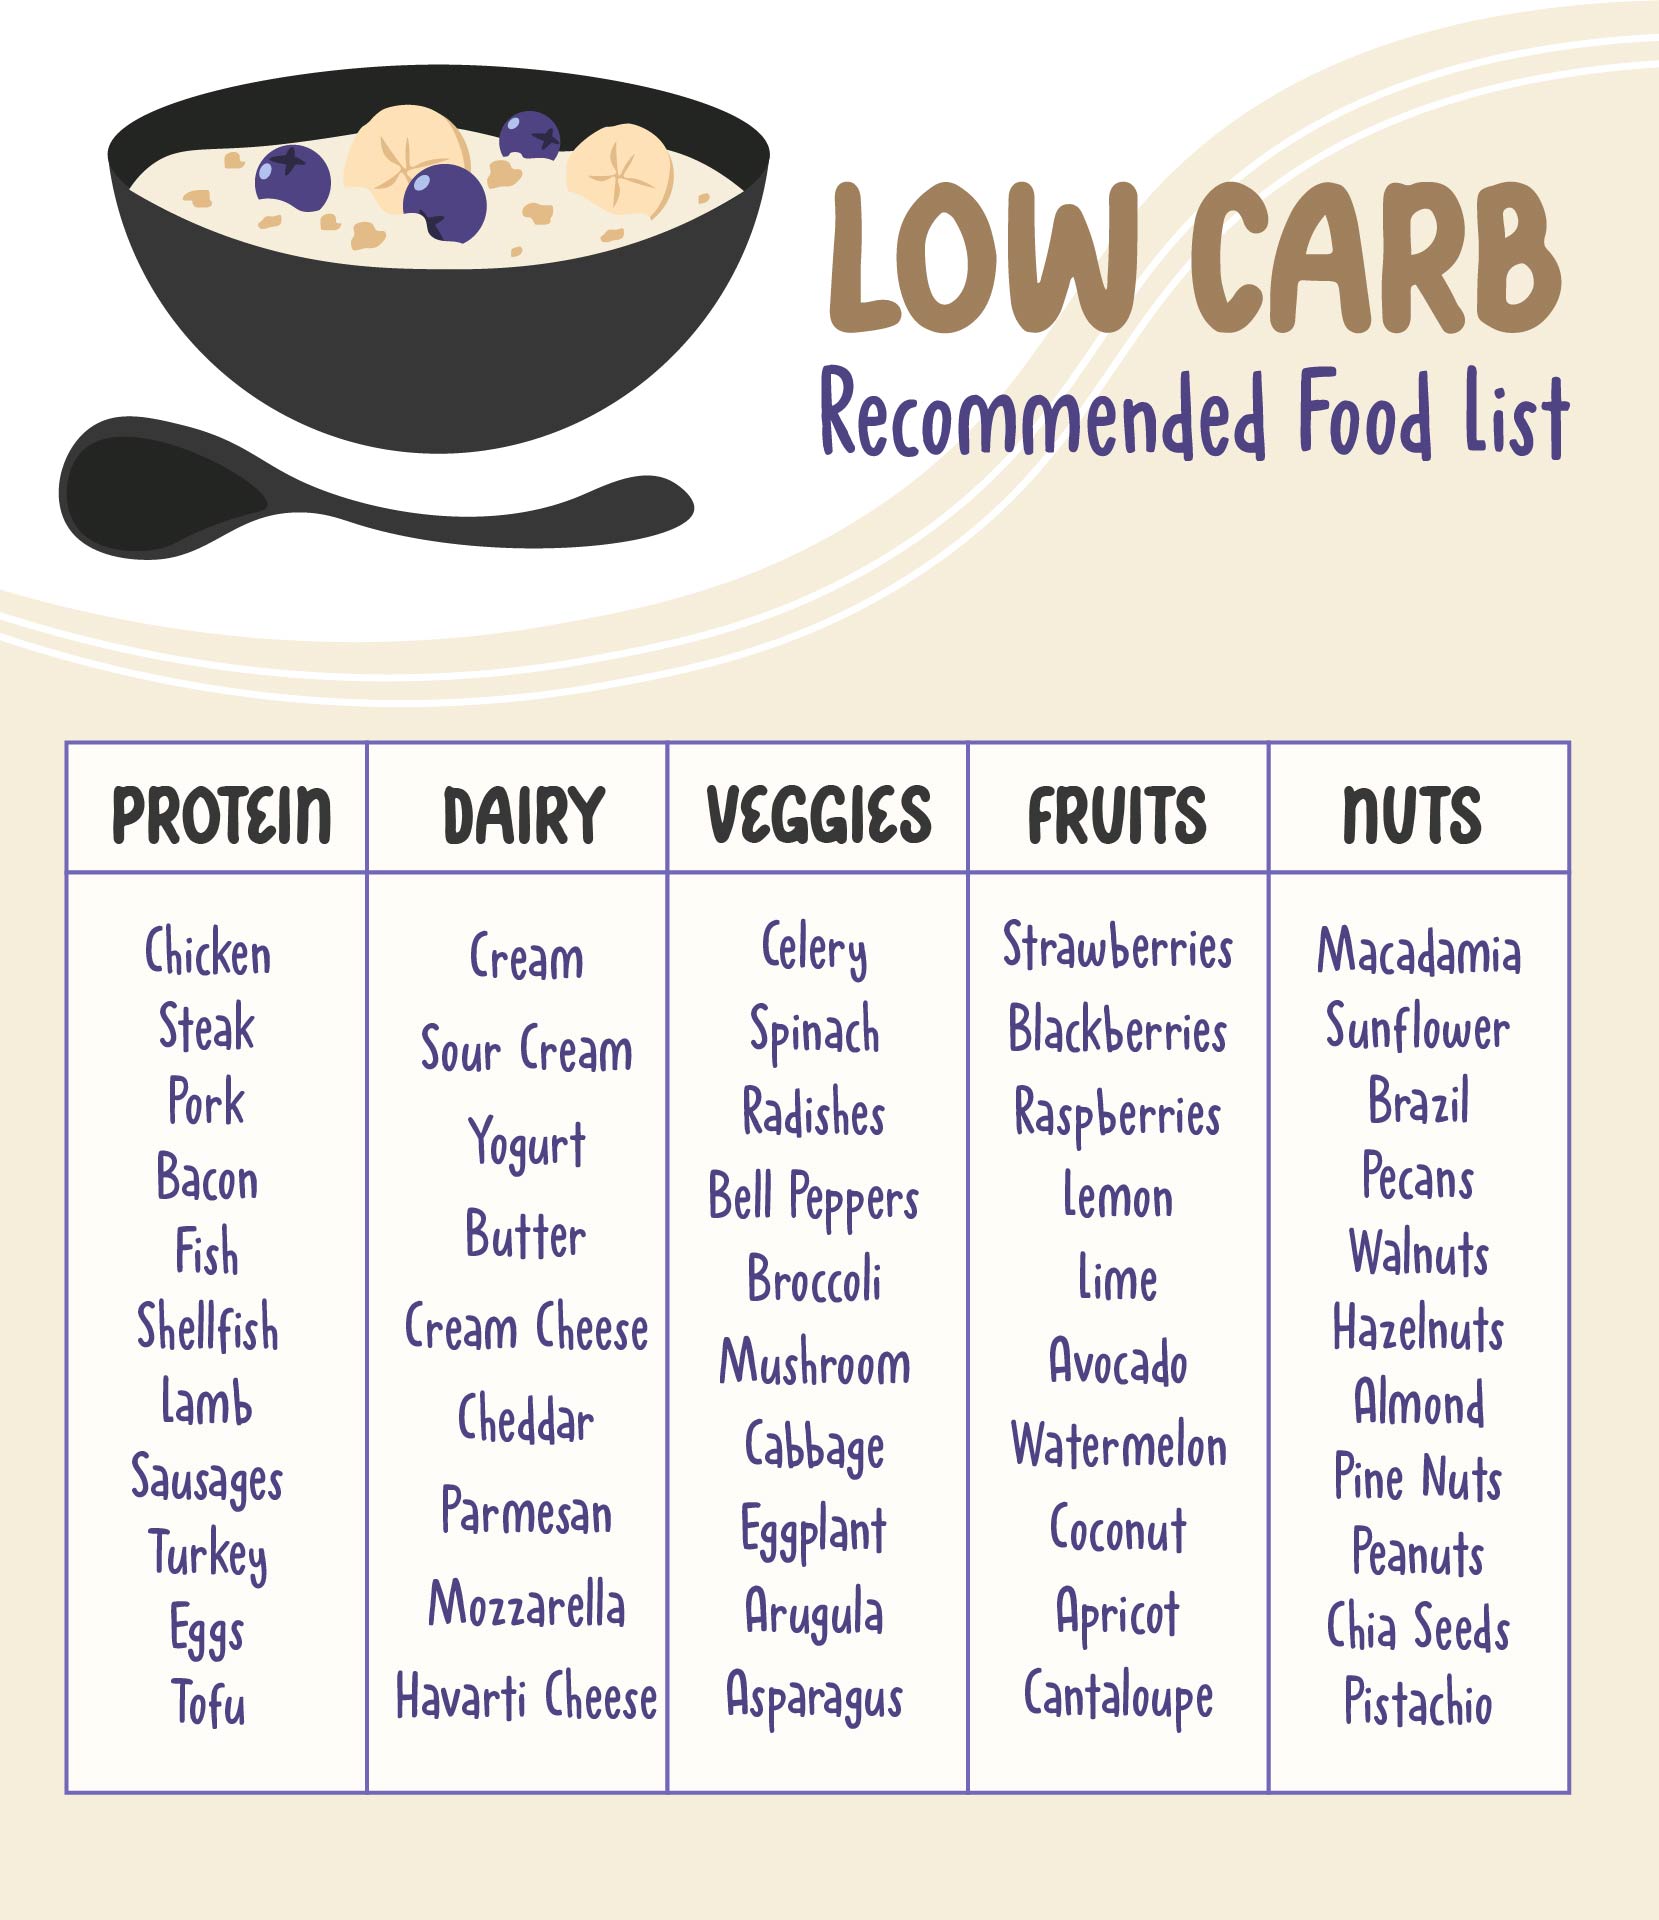 Low Carb Recommended Food List Printable